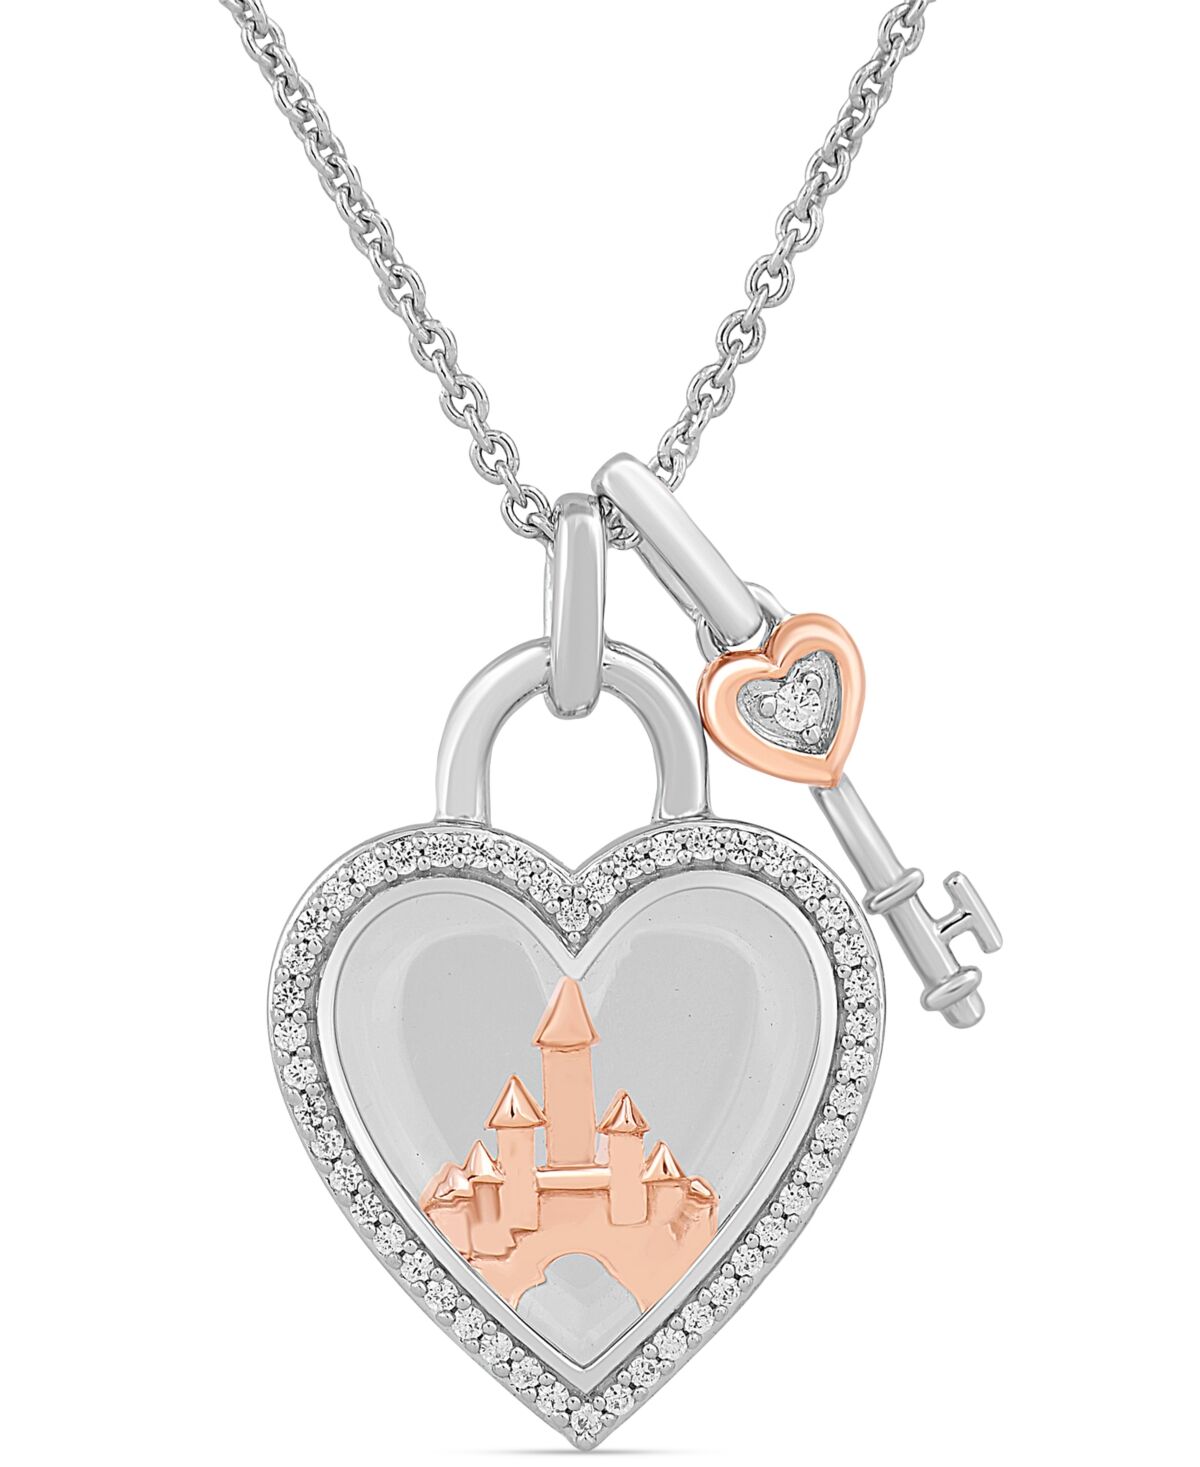 Disney Enchanted Disney Fine Jewelry D100 White Quartz (3-1/20 ct. t.w.) Diamond (1/6 ct. t.w.) Heart and Key Pendant Necklace in Sterling Silver & 14k Rose